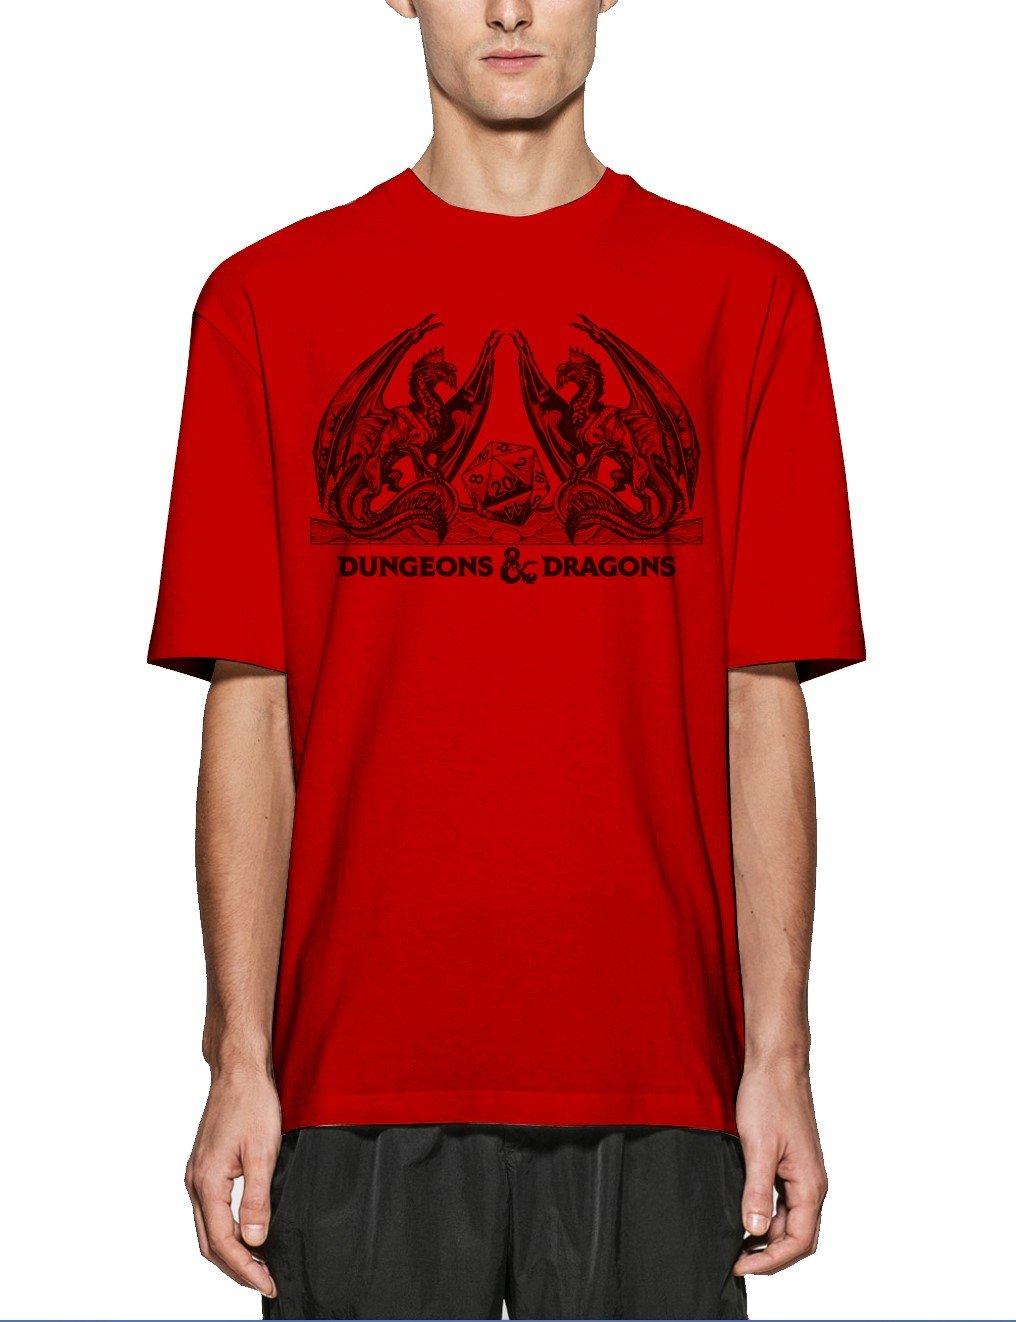 Dungeons and Dragons Heraldic Dragons with Dice Red Unisex Short Sleeve Cotton T-Shirt